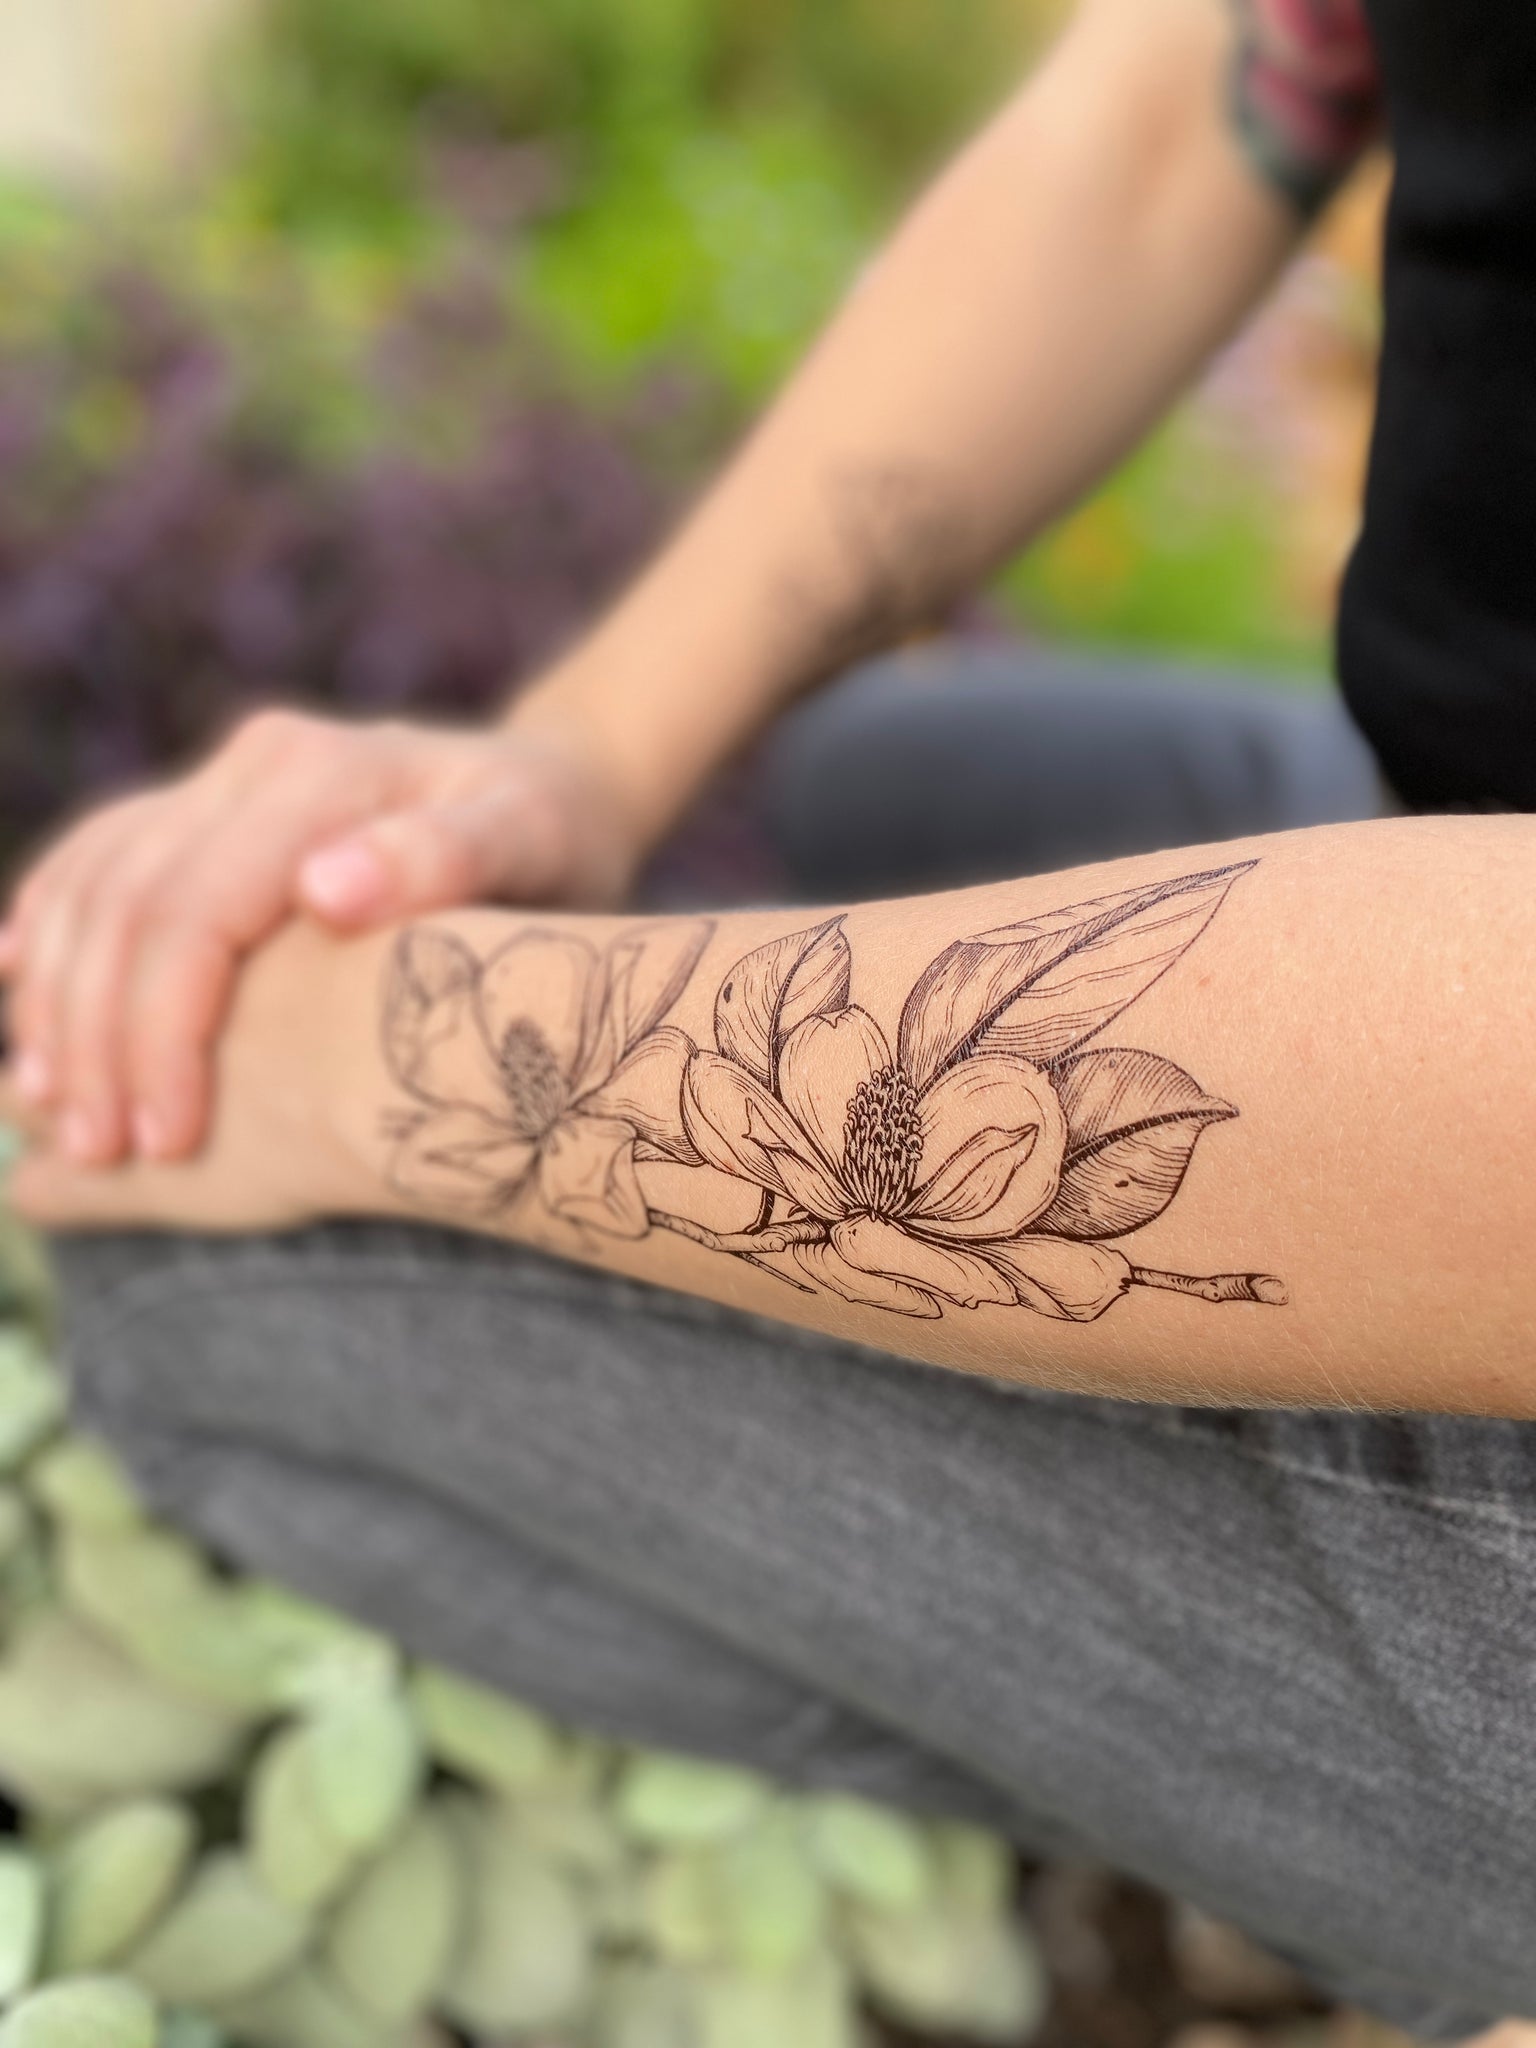 These Temporary Floral Tattoos Are So Realistic I Want Them All